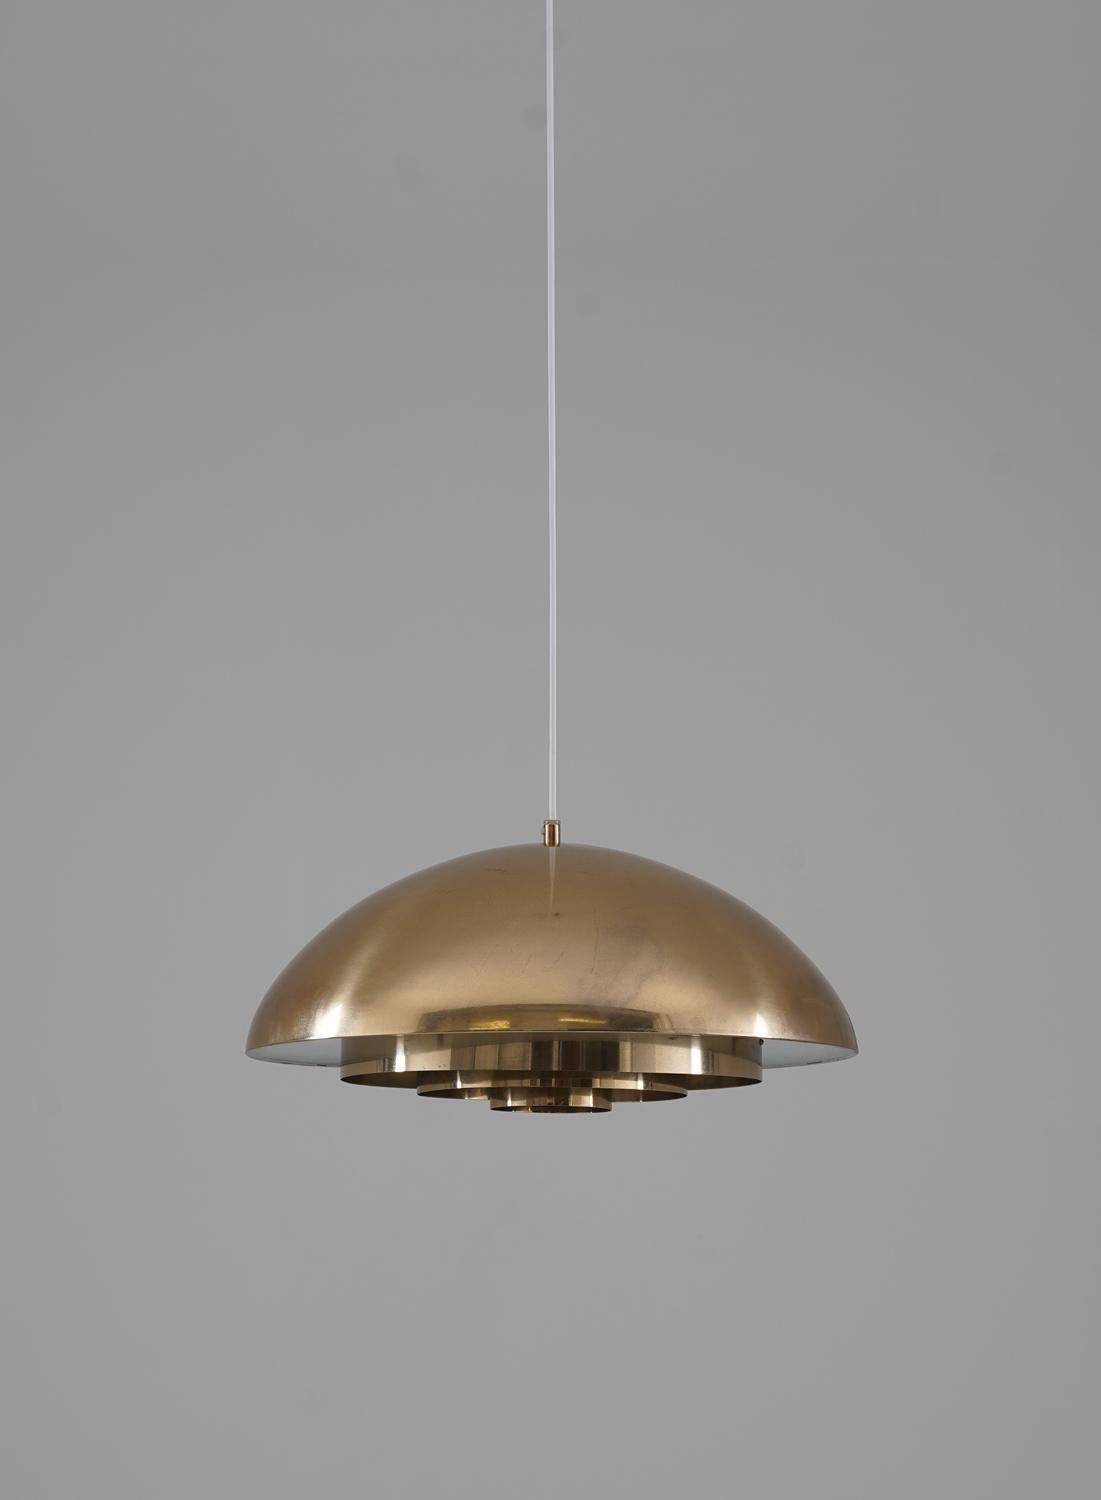 A beautiful pair of pendants in brass, manufactured by Bergboms, Sweden, 1960s.

The lamps feature one light source, surrounded by a large round brass shade with beautiful brass diffusers. 

Condition: Good original condition with patina, spots